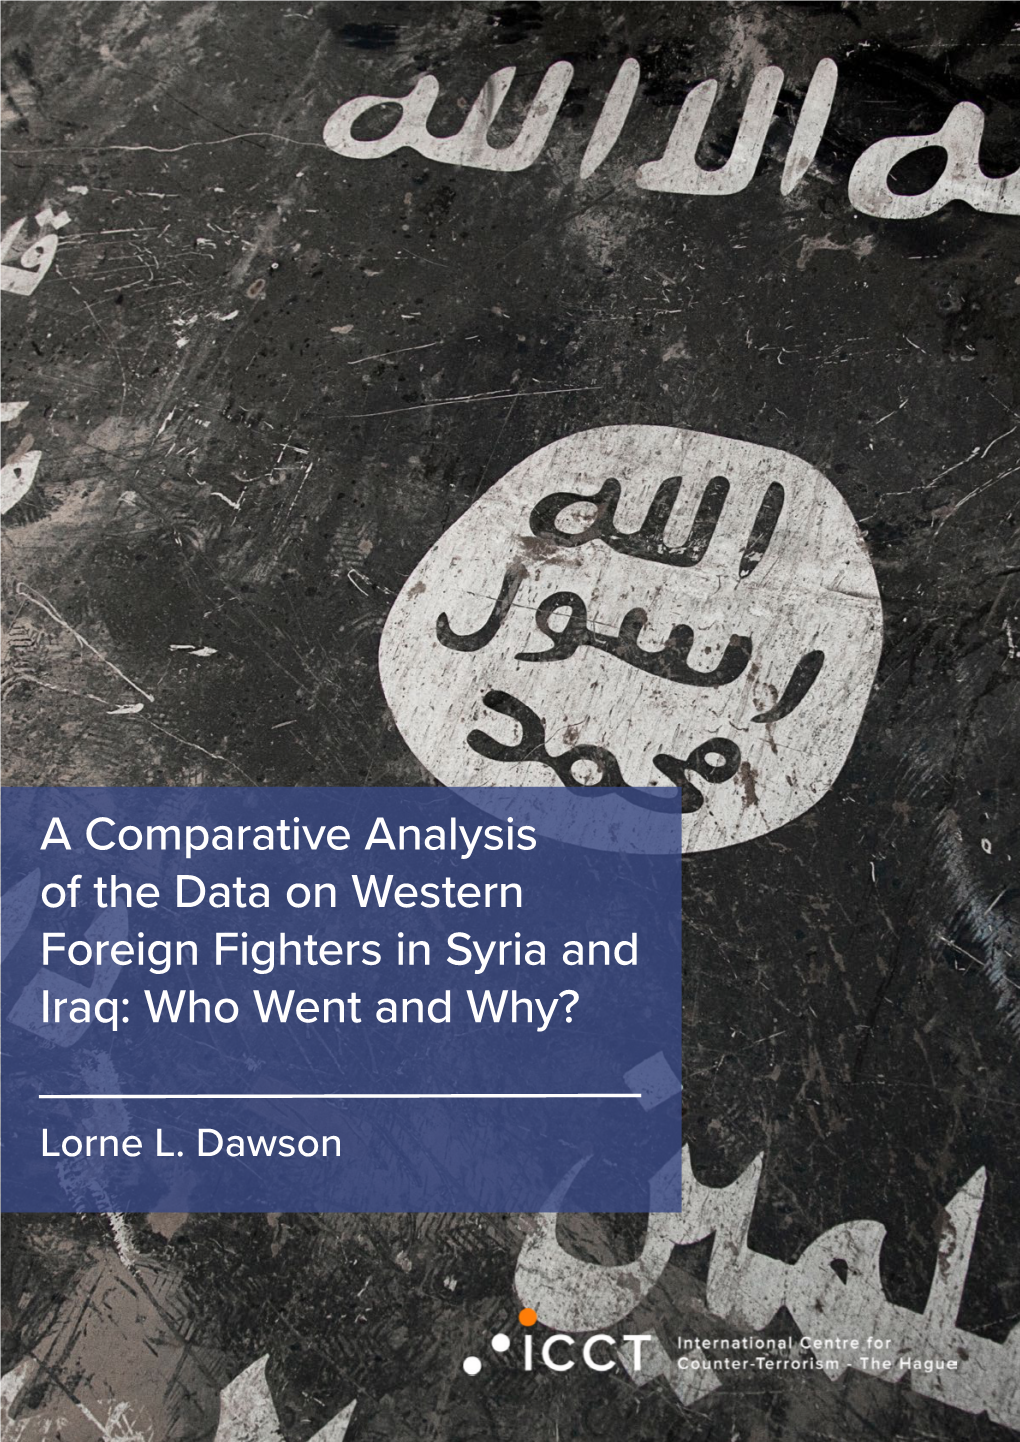 A Comparative Analysis of the Data on Western Foreign Fighters in Syria and Iraq: Who Went and Why?